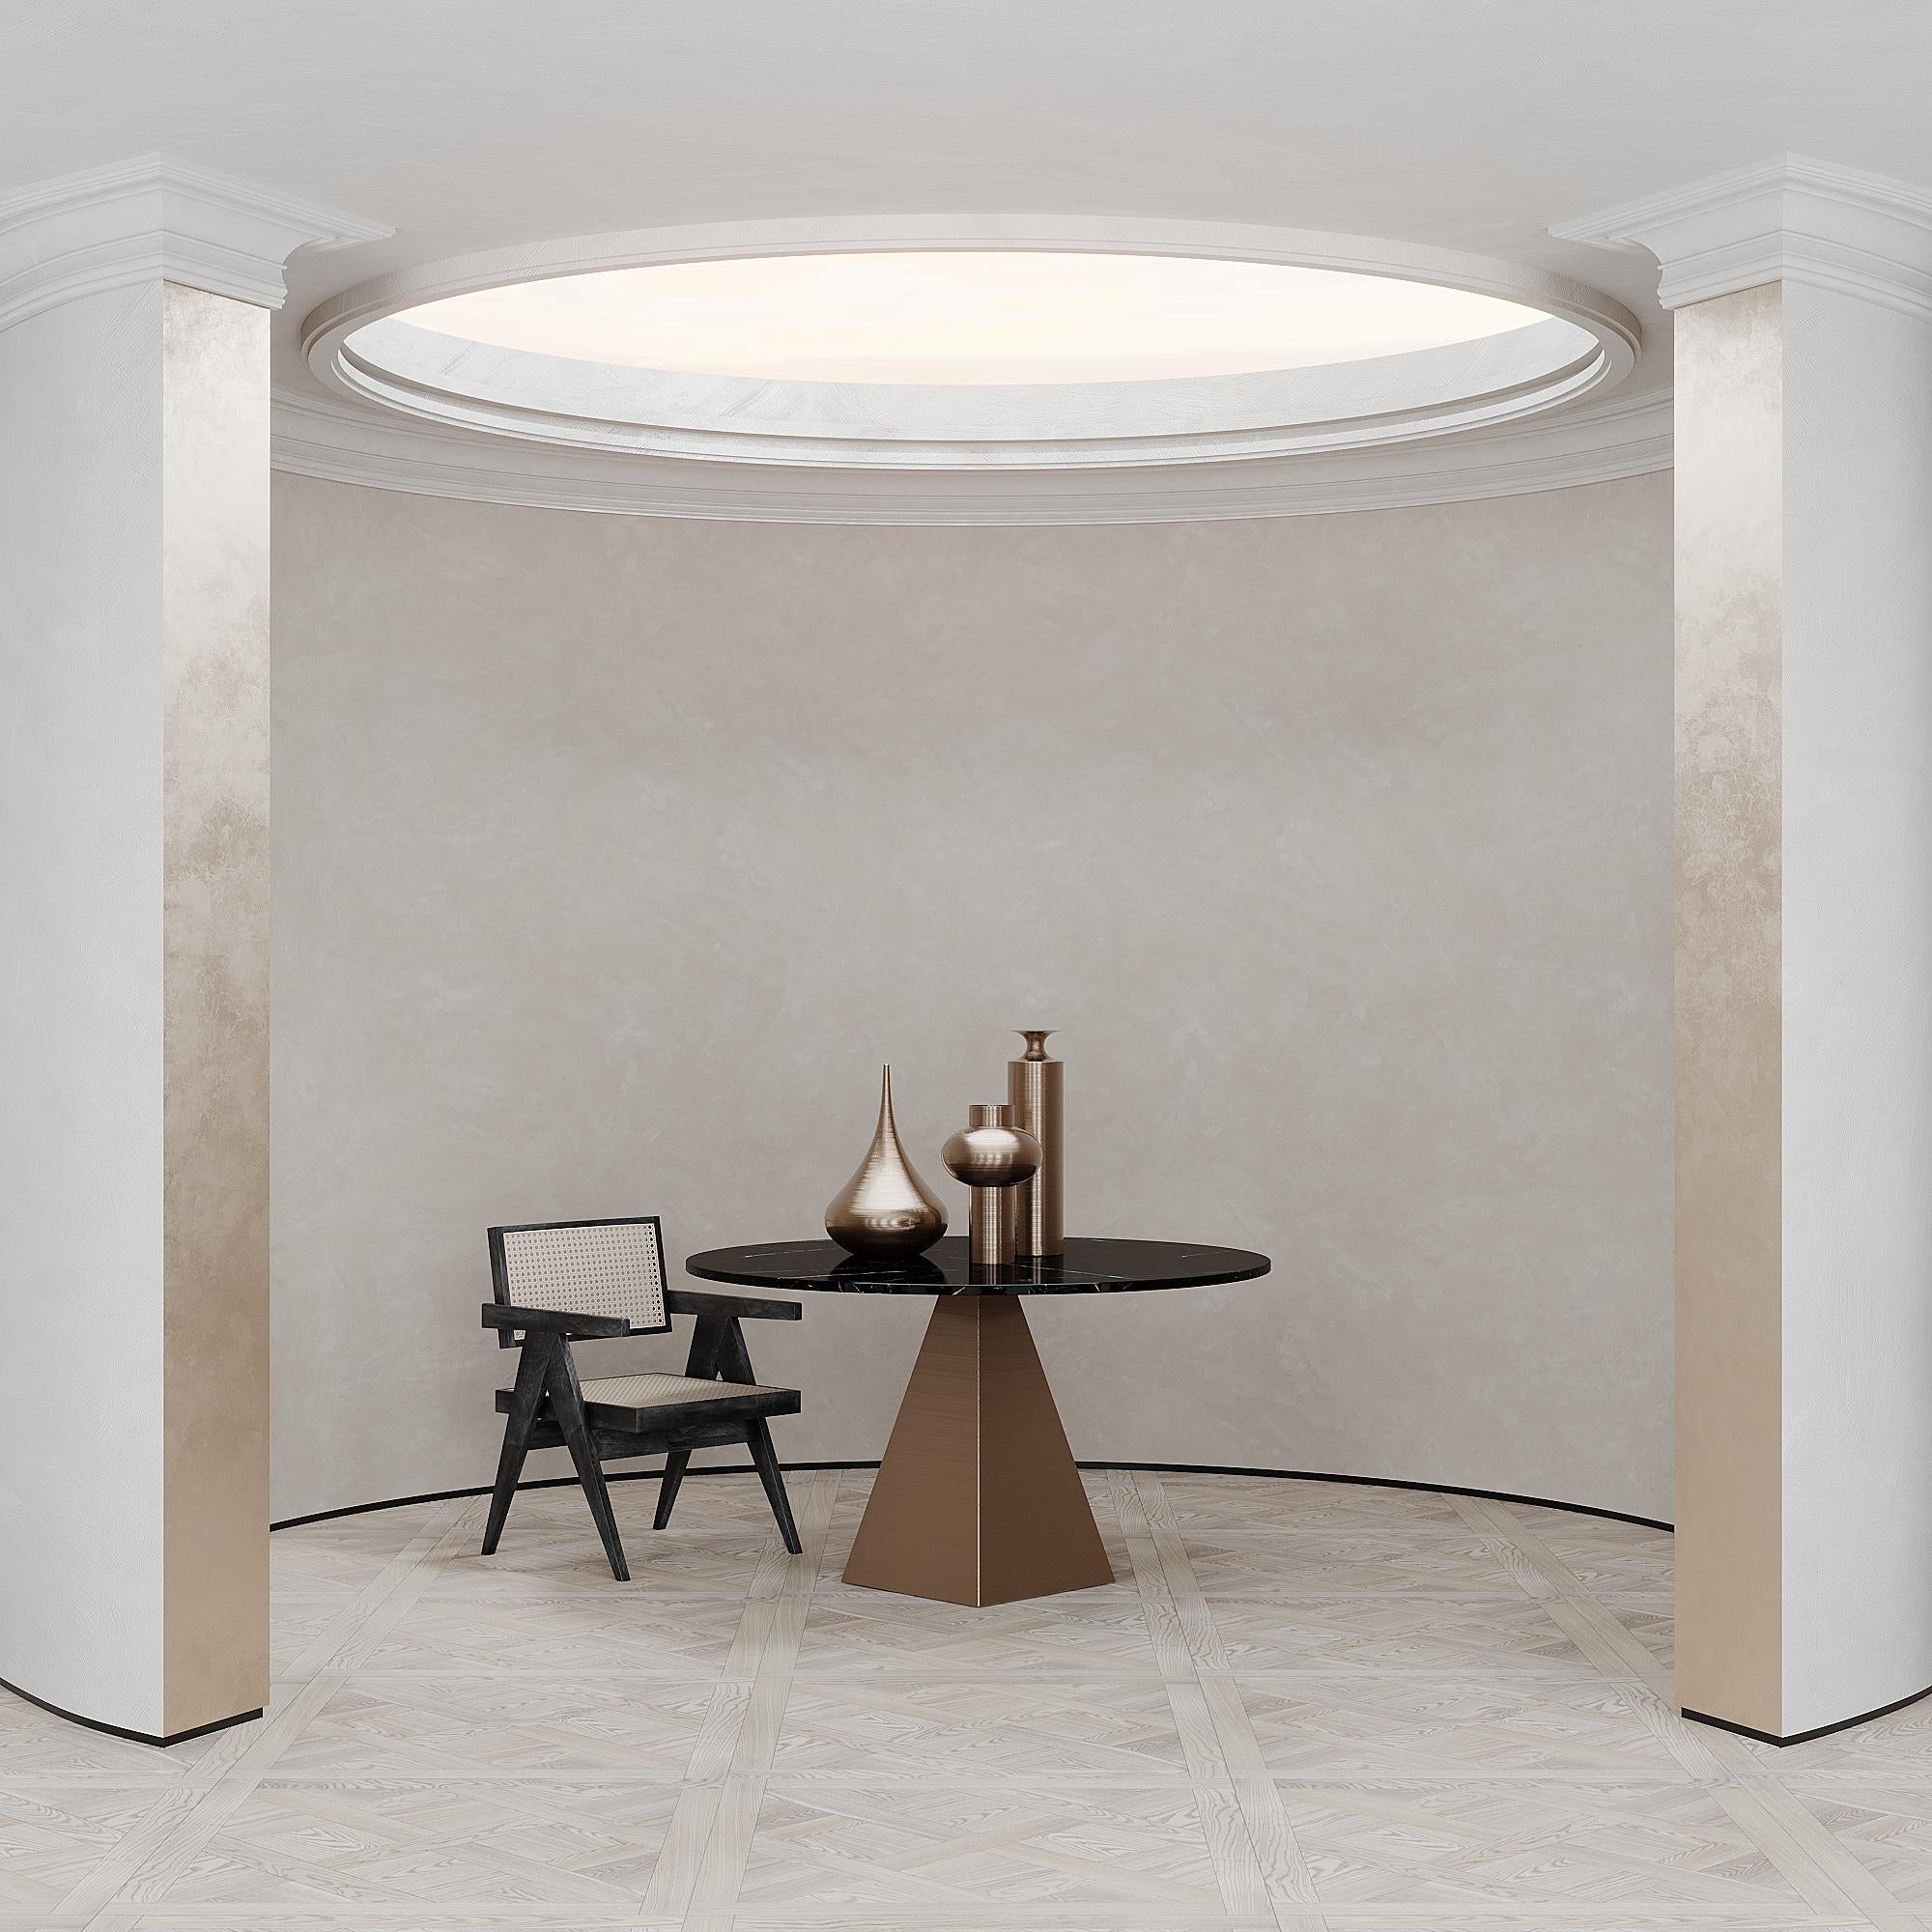 Minimalist Solaris Round Dining Table, Made in Italy For Sale